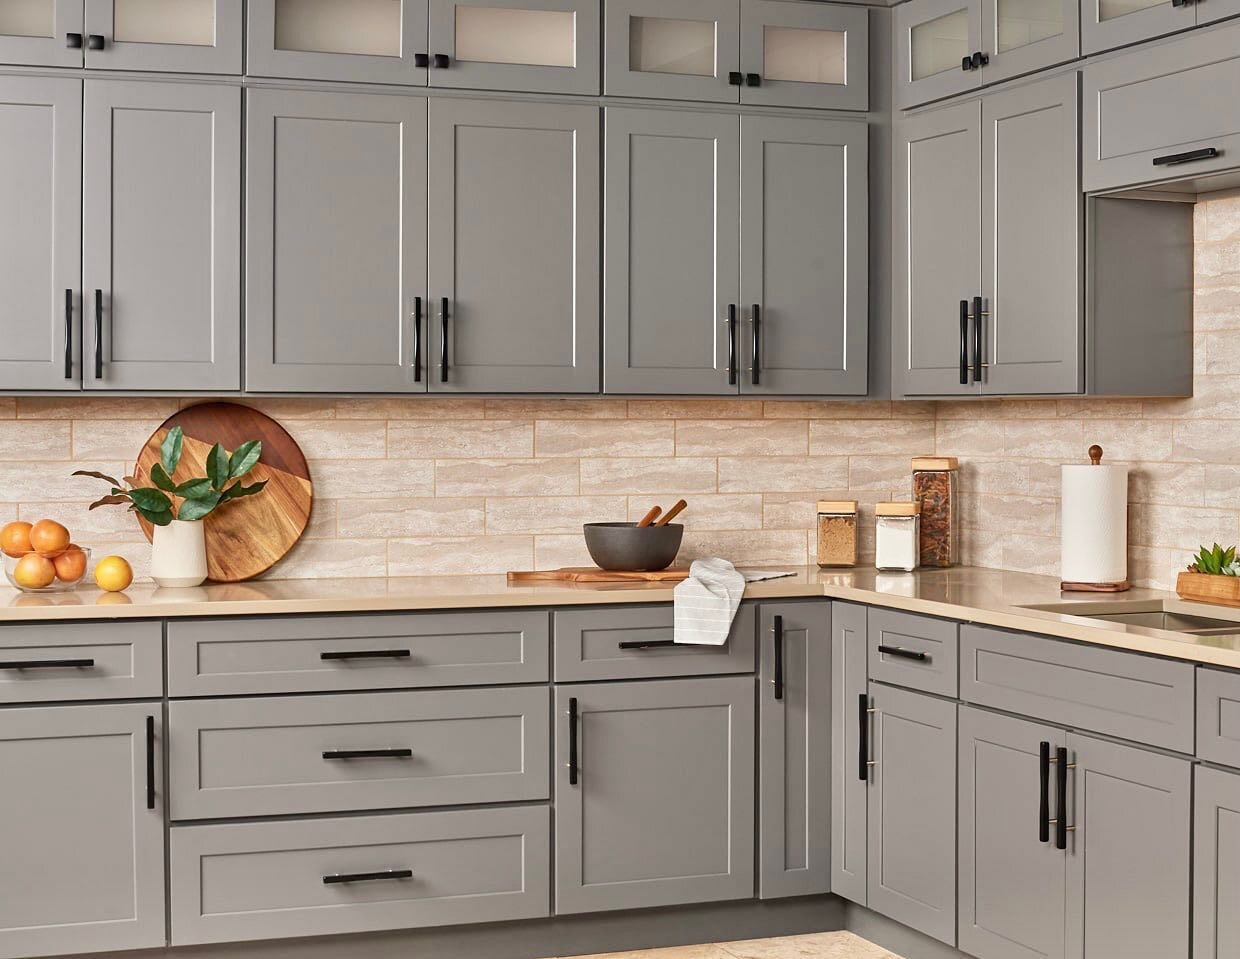 Hello Lovely! 🤩
A darker take on a neutral tone brings these gorgeous shaker style cabinets to LIFE!
We design, deliver and install high quality solid wood cabinetry for kitchens and bathrooms.
Customer service and satisfaction is our top priority. 